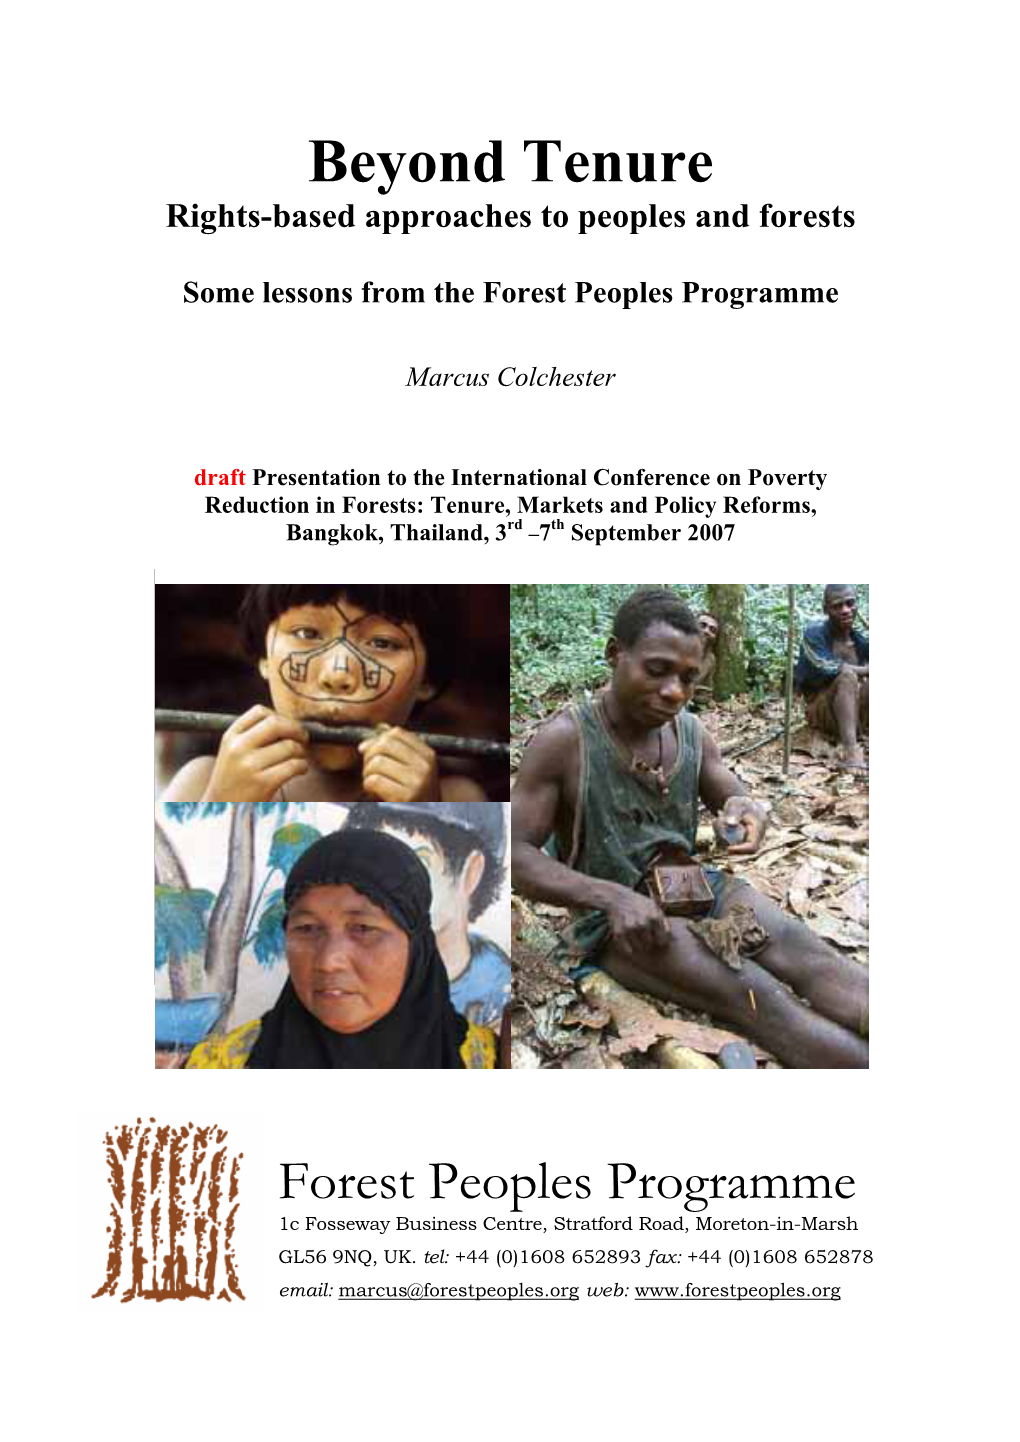 Beyond Tenure Rights-Based Approaches to Peoples and Forests